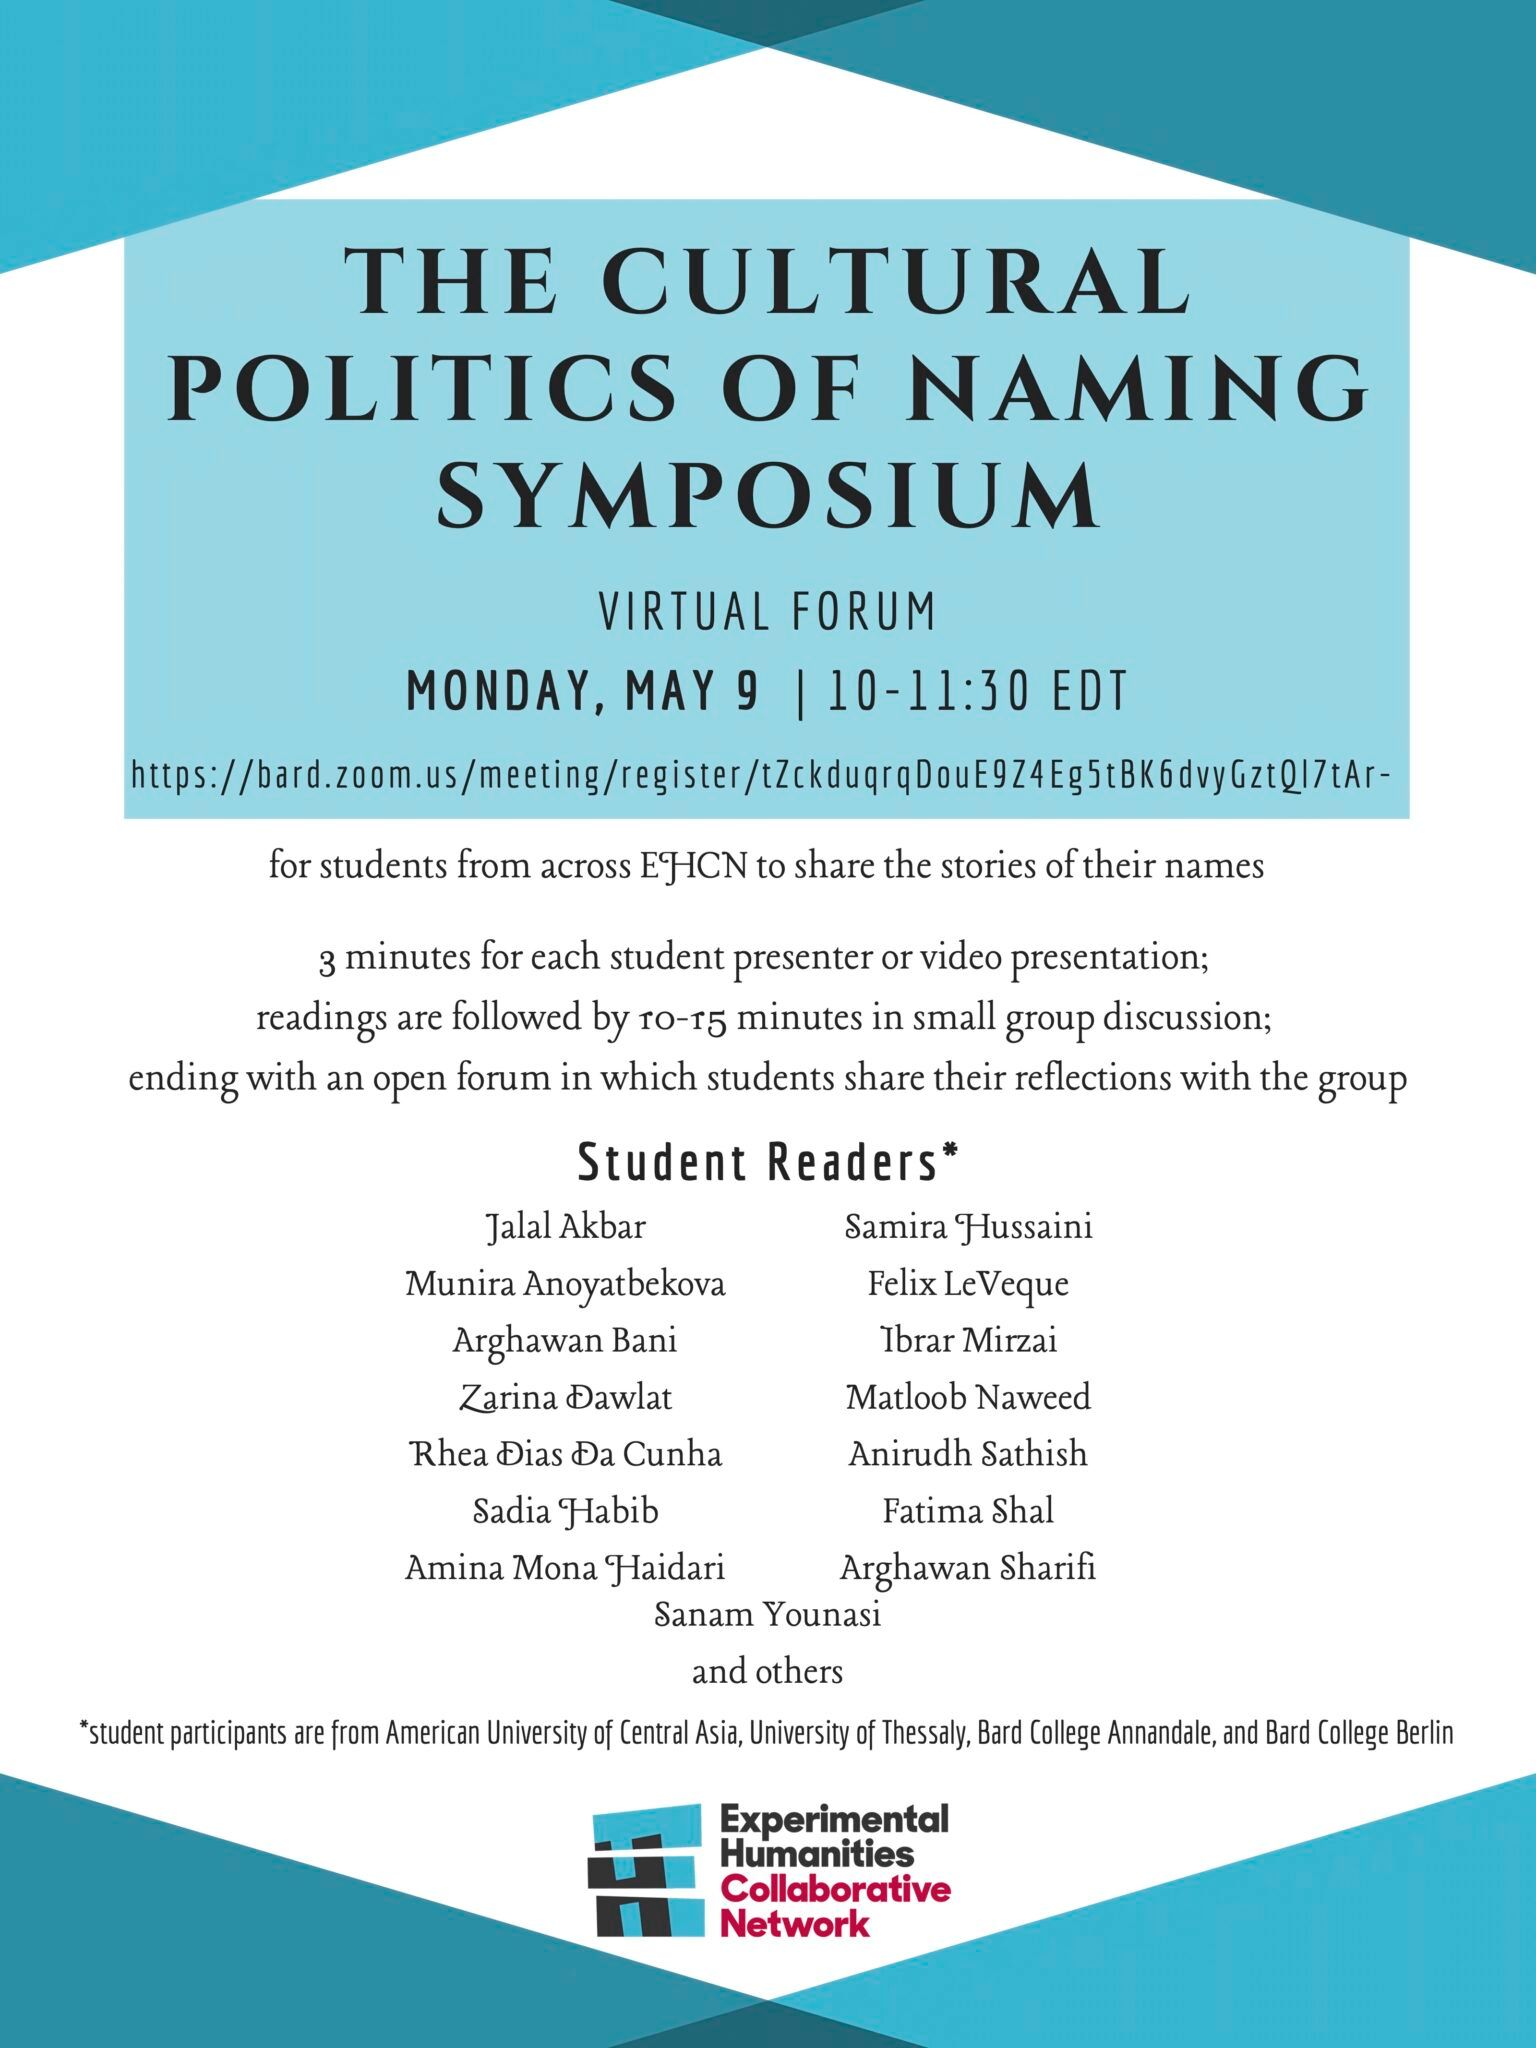 Poster for the Monday Virtual Forum of the Cultural Politics of Naming Symposium